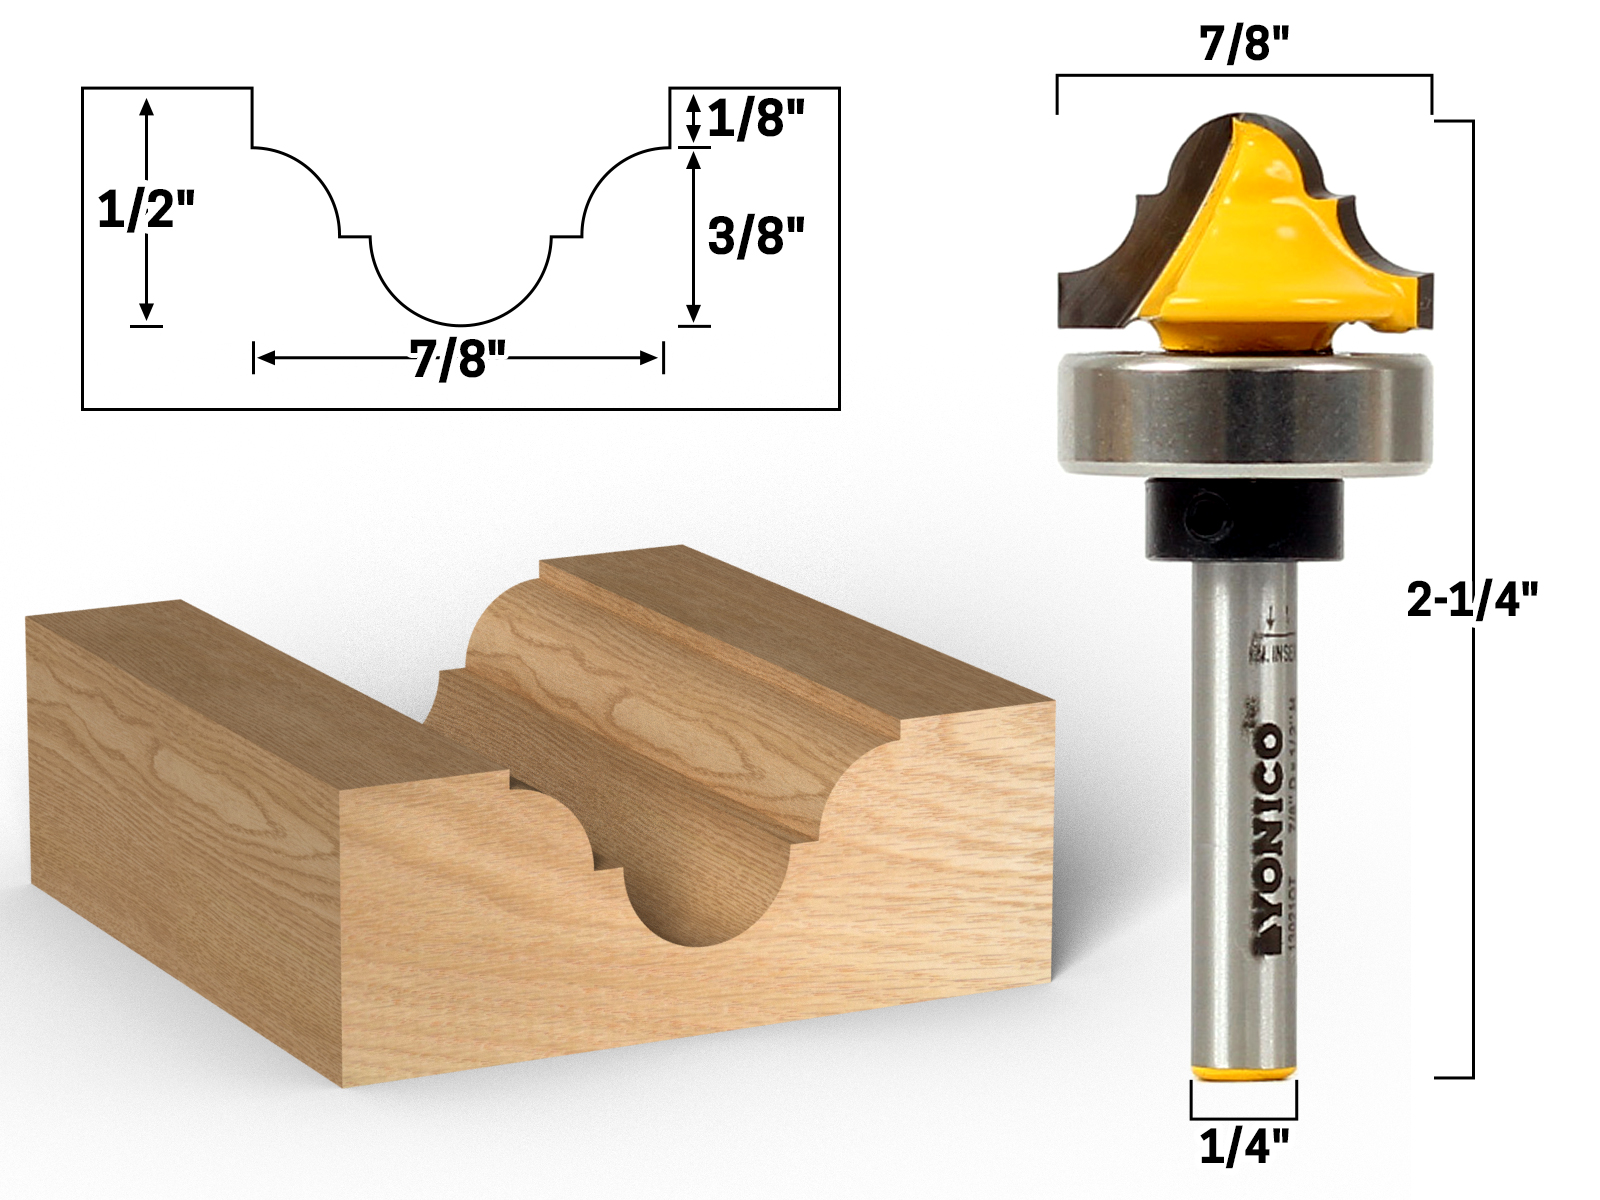 1 NEW  MLCS 3/16" R Double Roman Ogee Carbide Tip Router Bit 1/2" Shank n4 